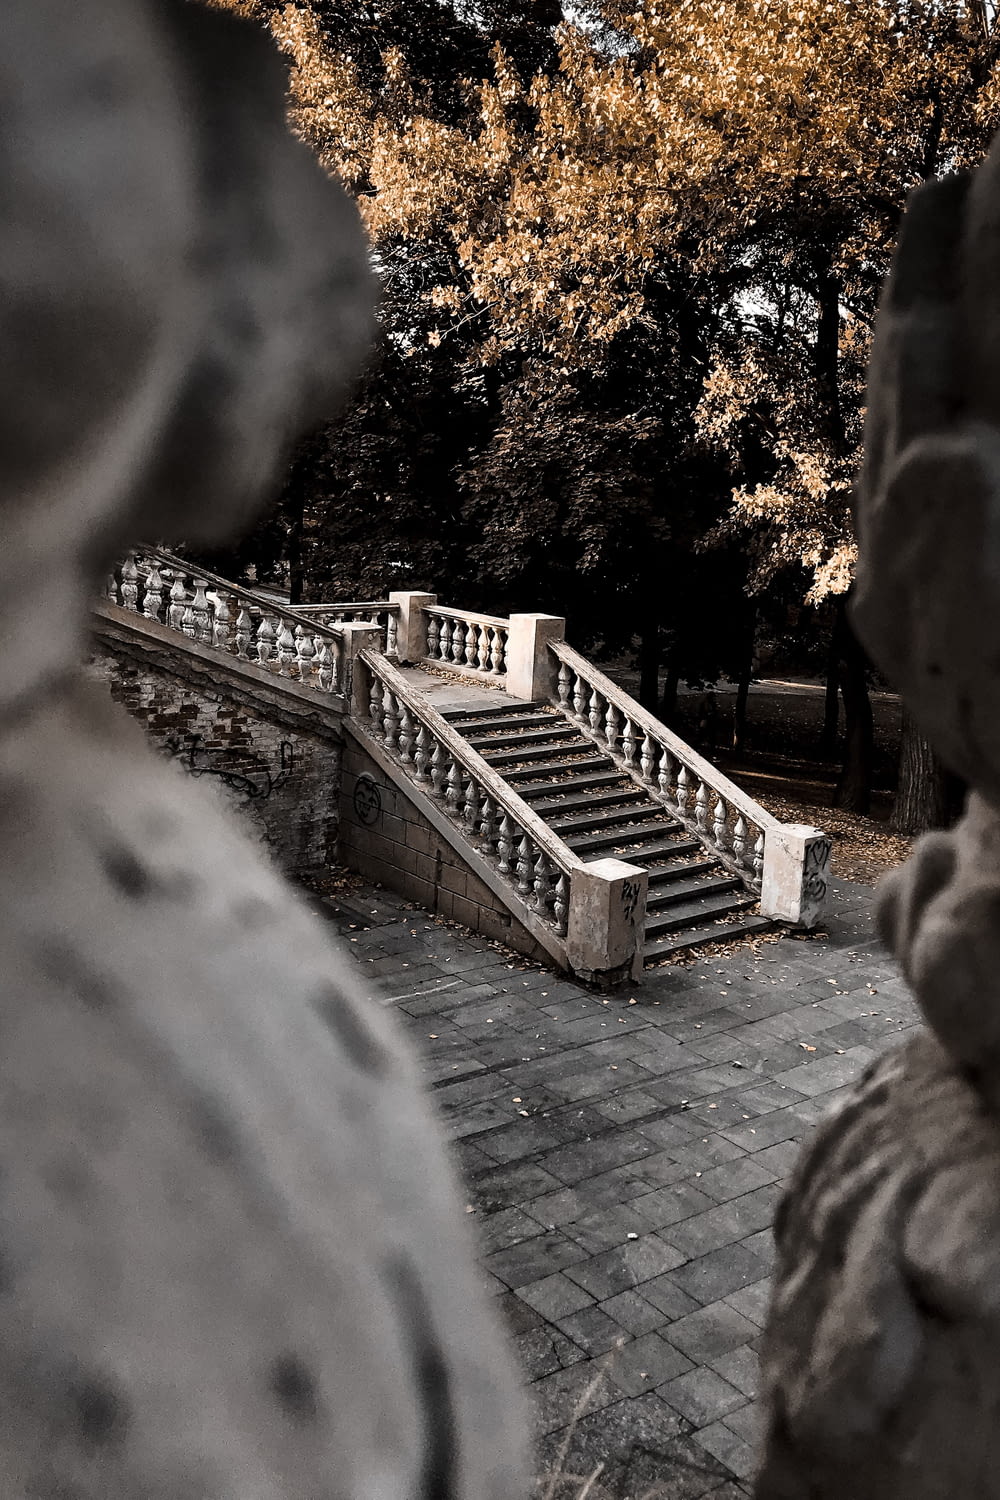 a statue of a person sitting on a bench next to a set of stairs